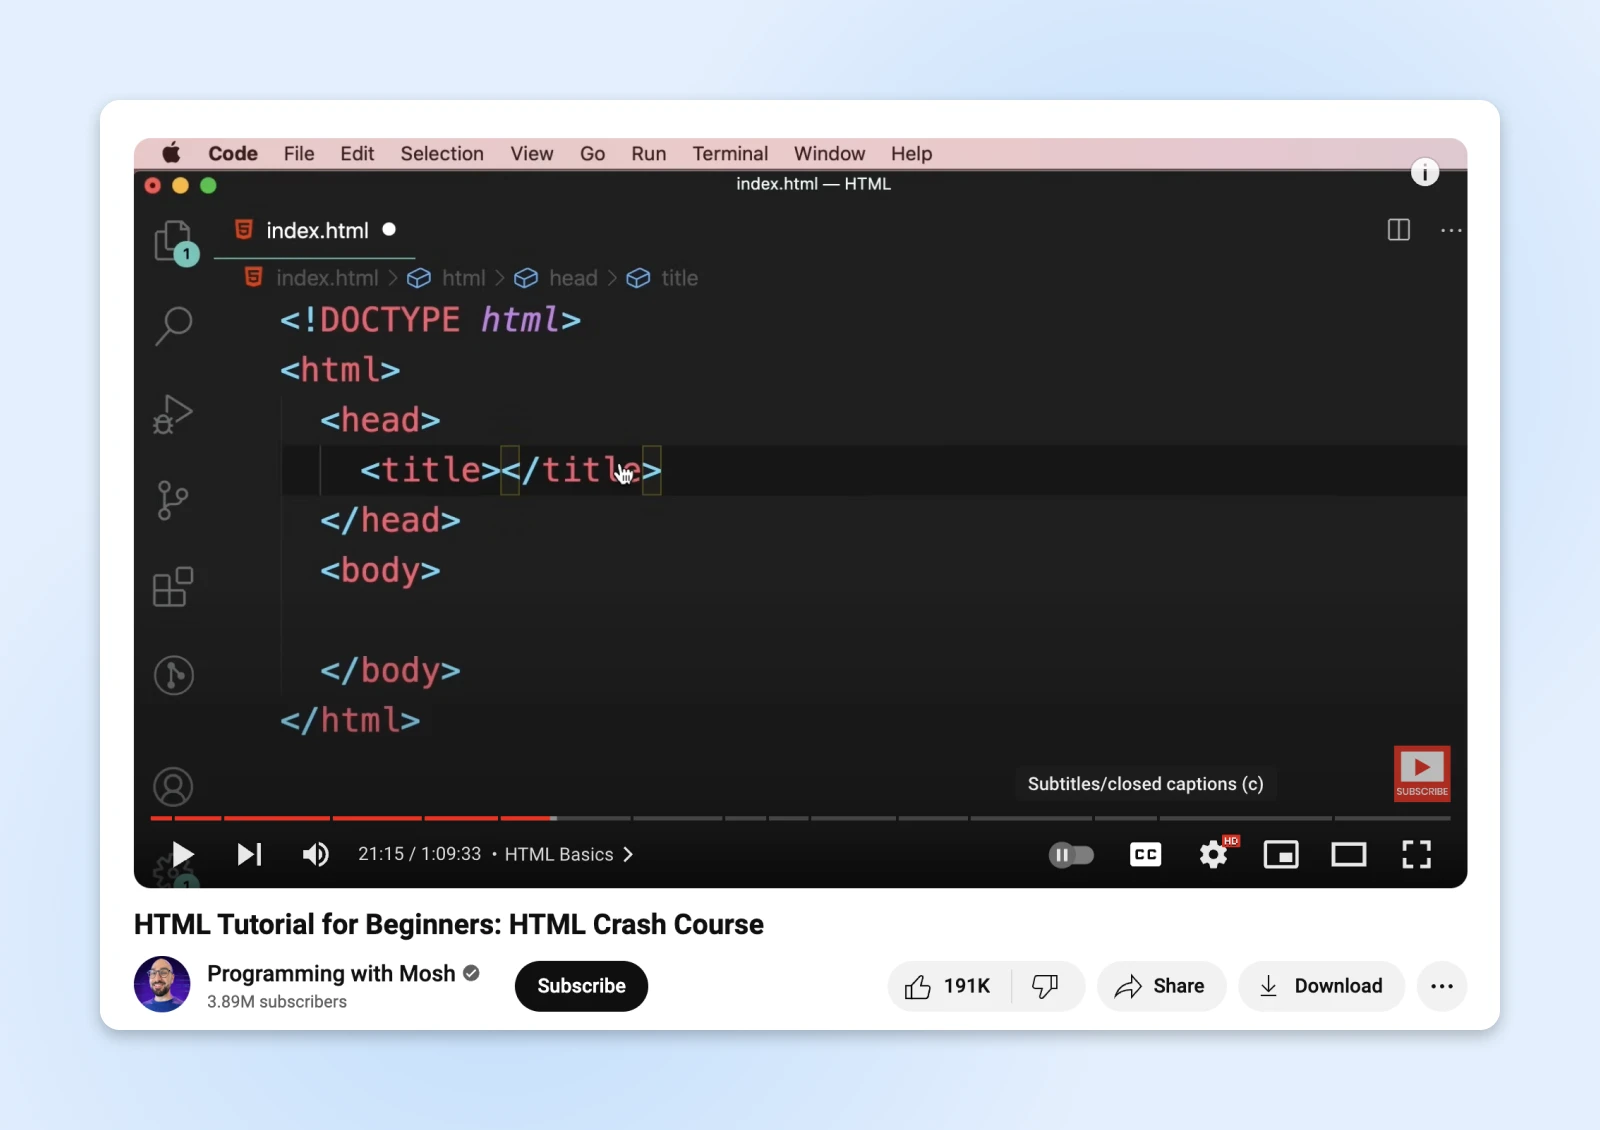 A frame of the 'HTML Tutorial for Beginners: HTML Crash Course' by Programming with Mosh